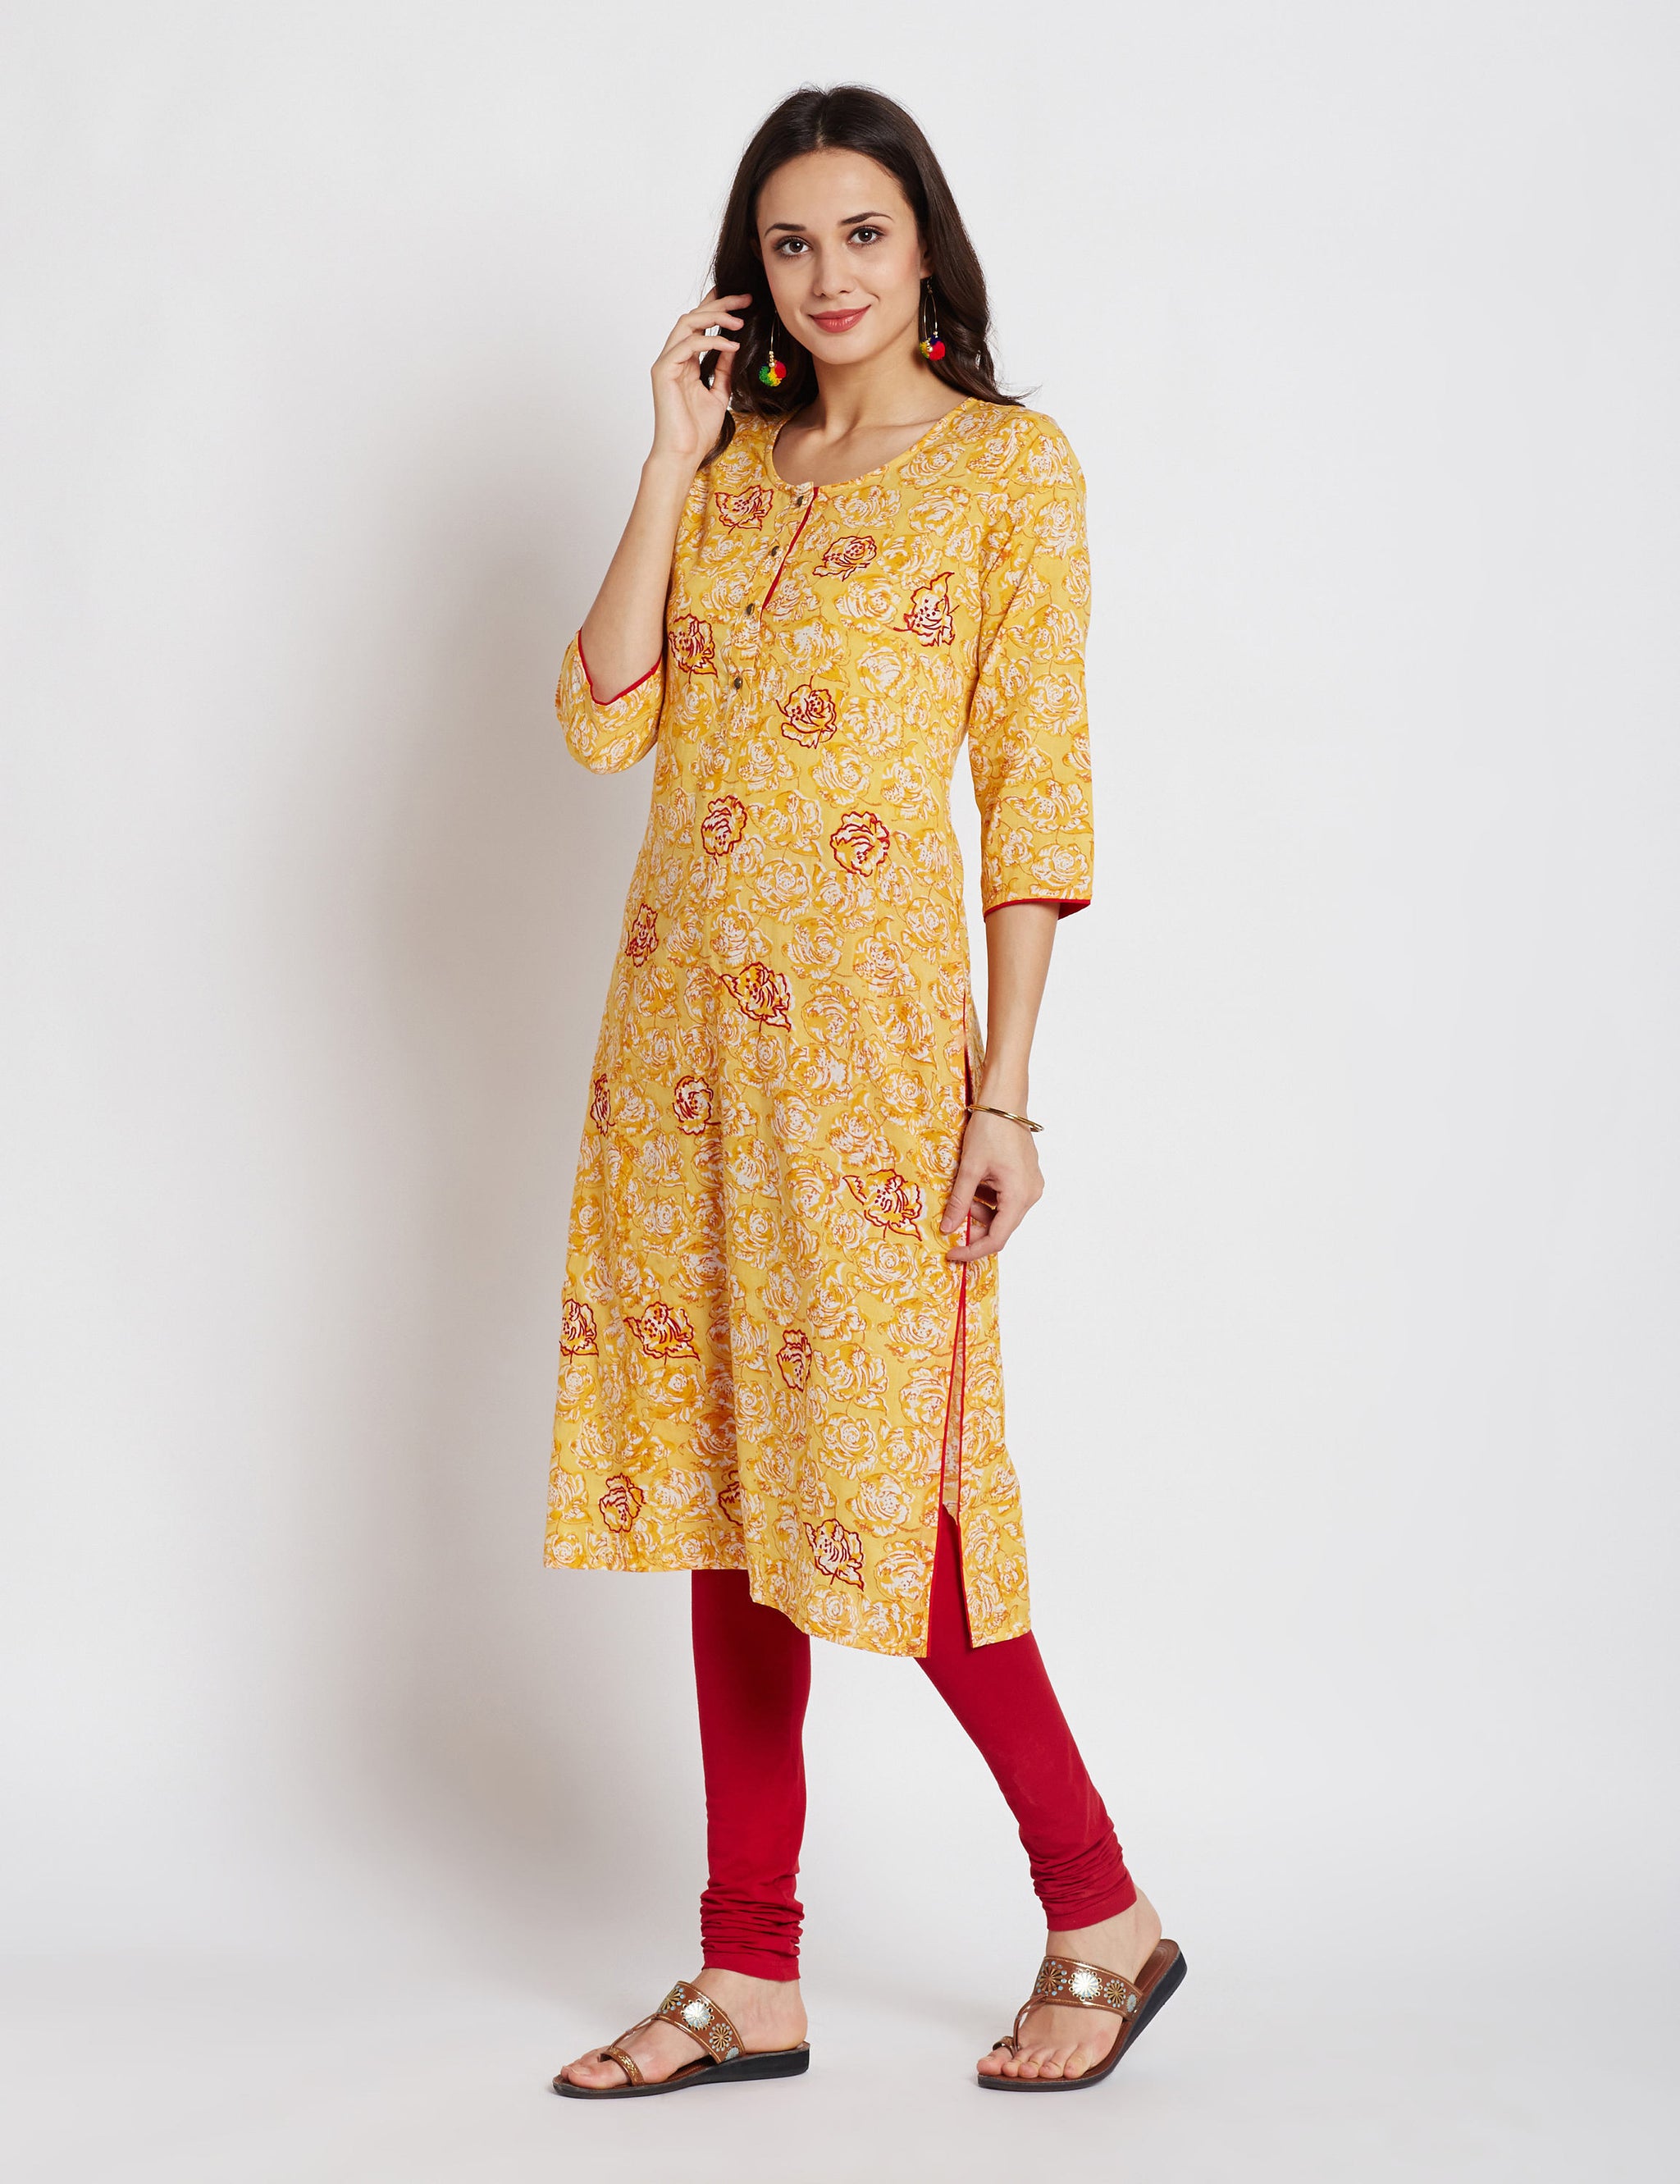 Hand block printed ethnic long Indian kurta in mango colour with embroidery